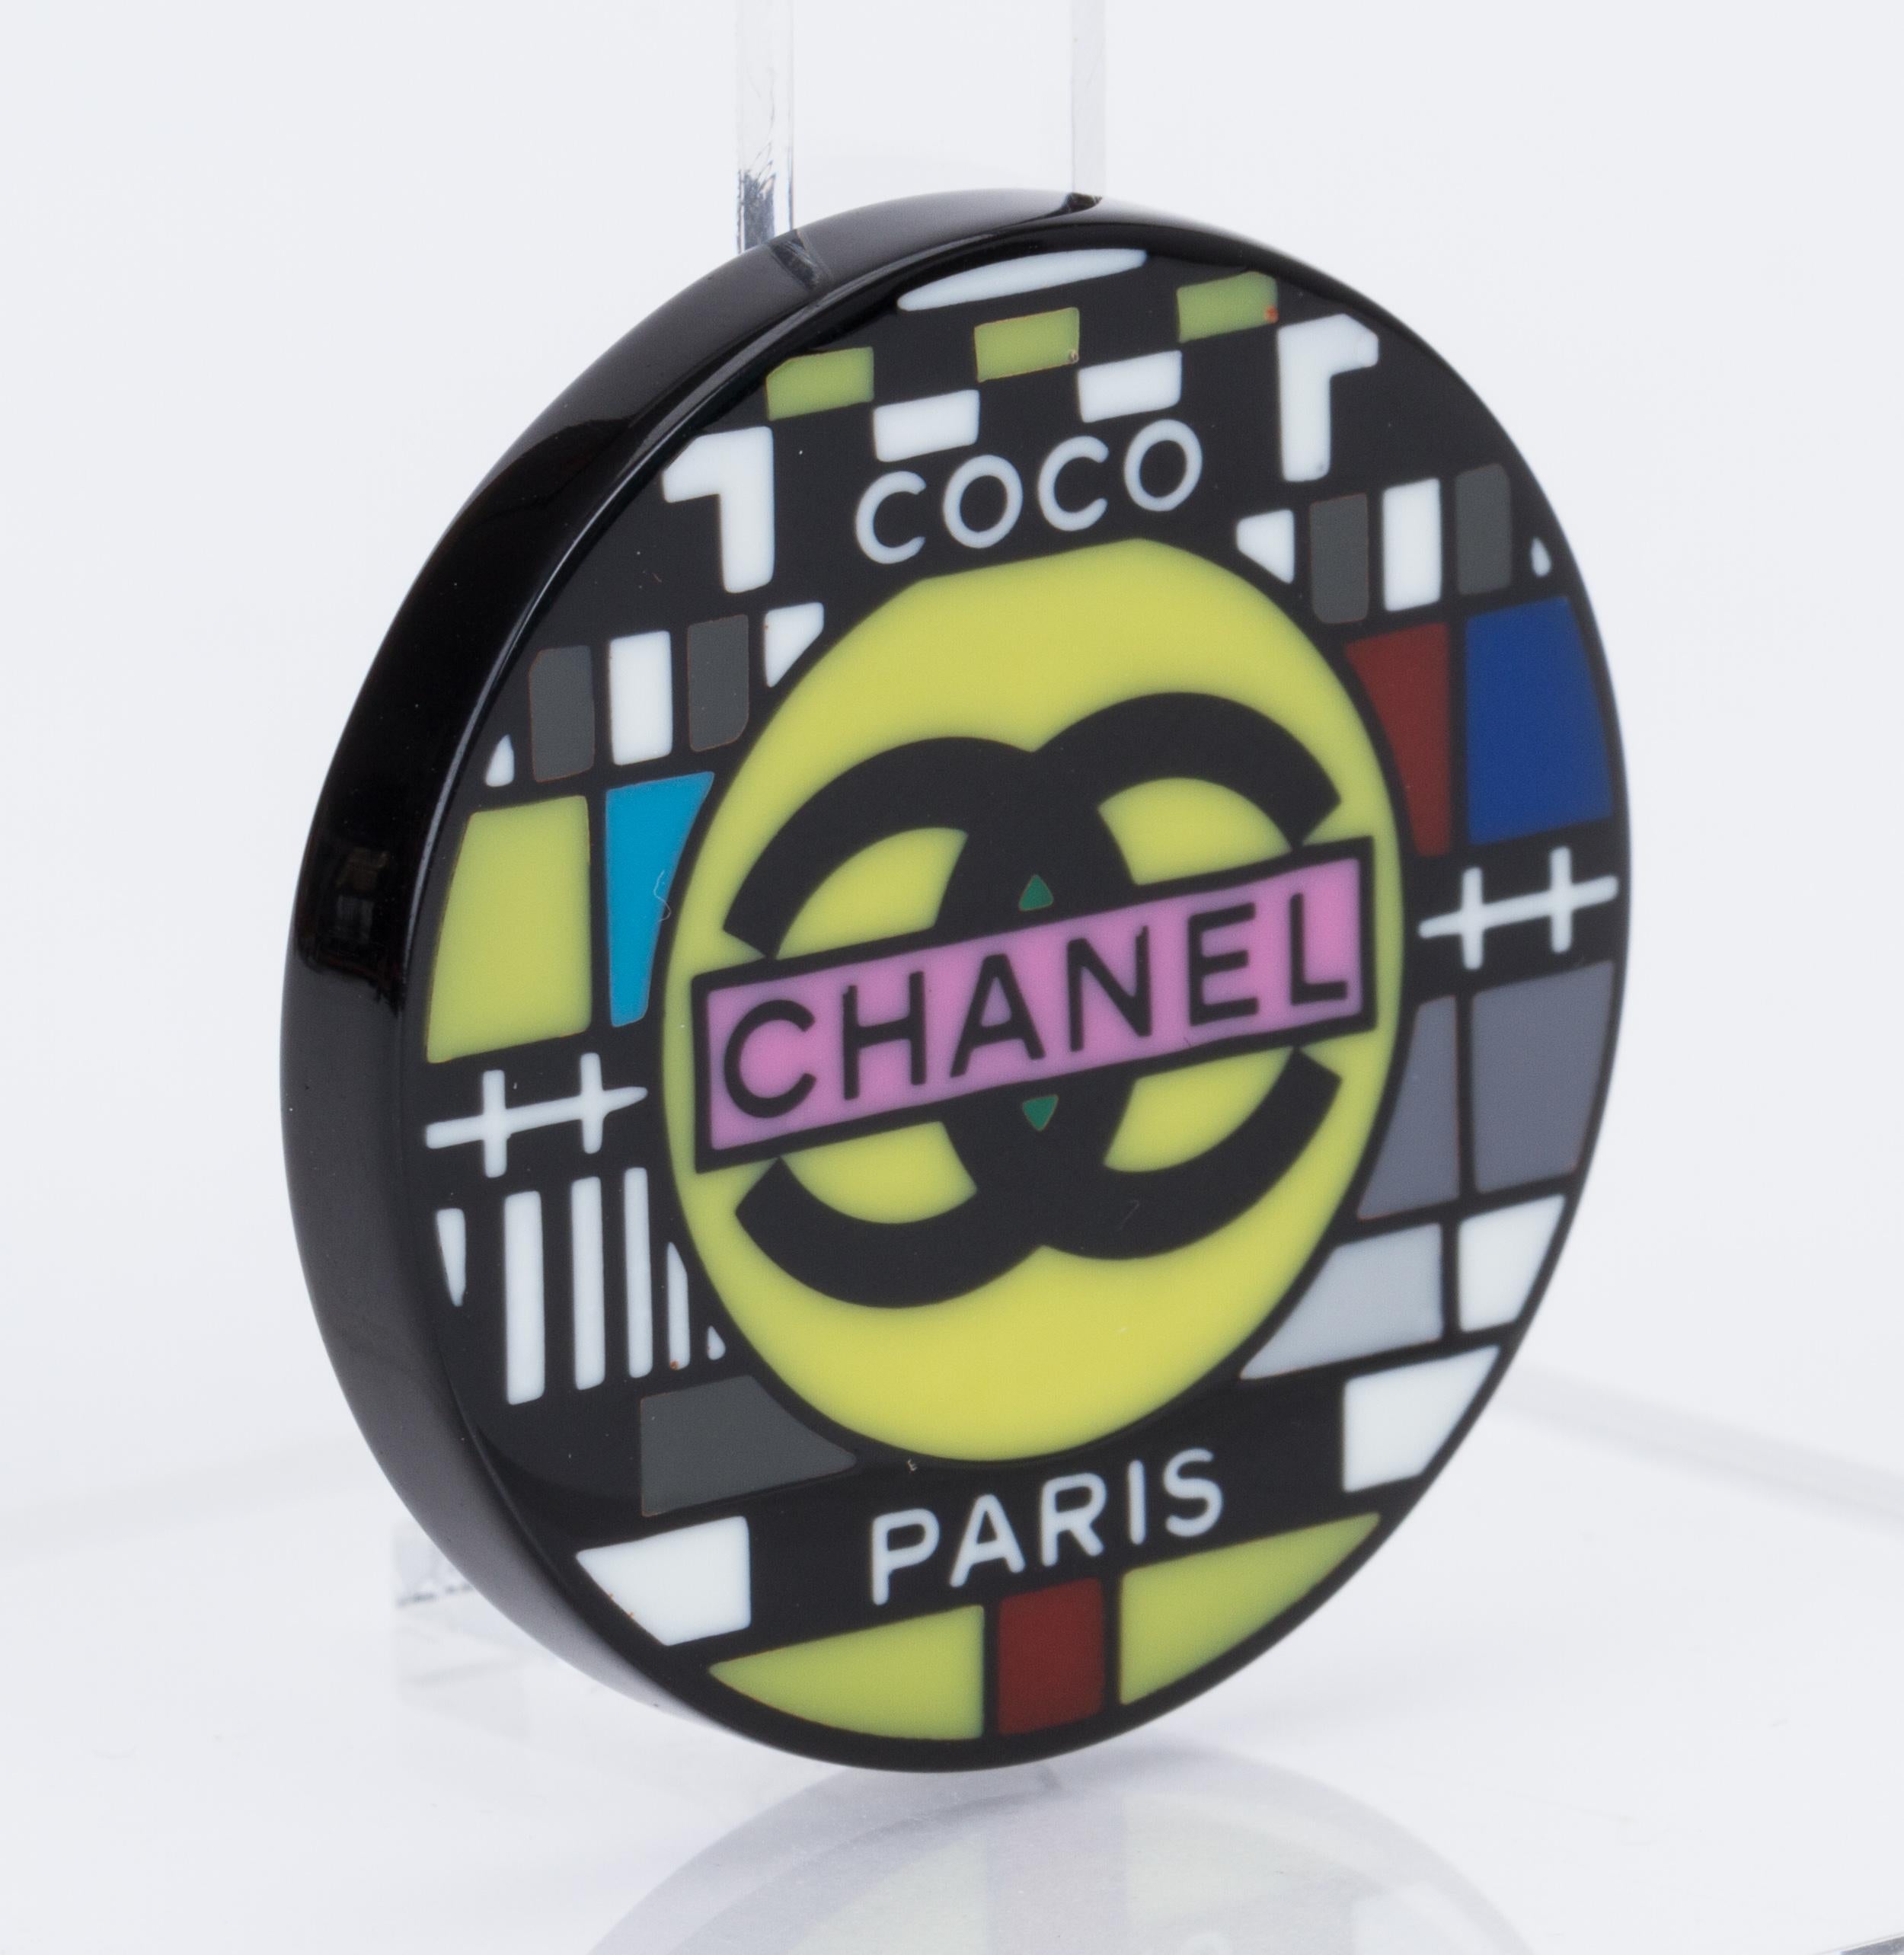 Chanel round television lucite pin. Collection spring 2017. Brand new in original box with ribbon.